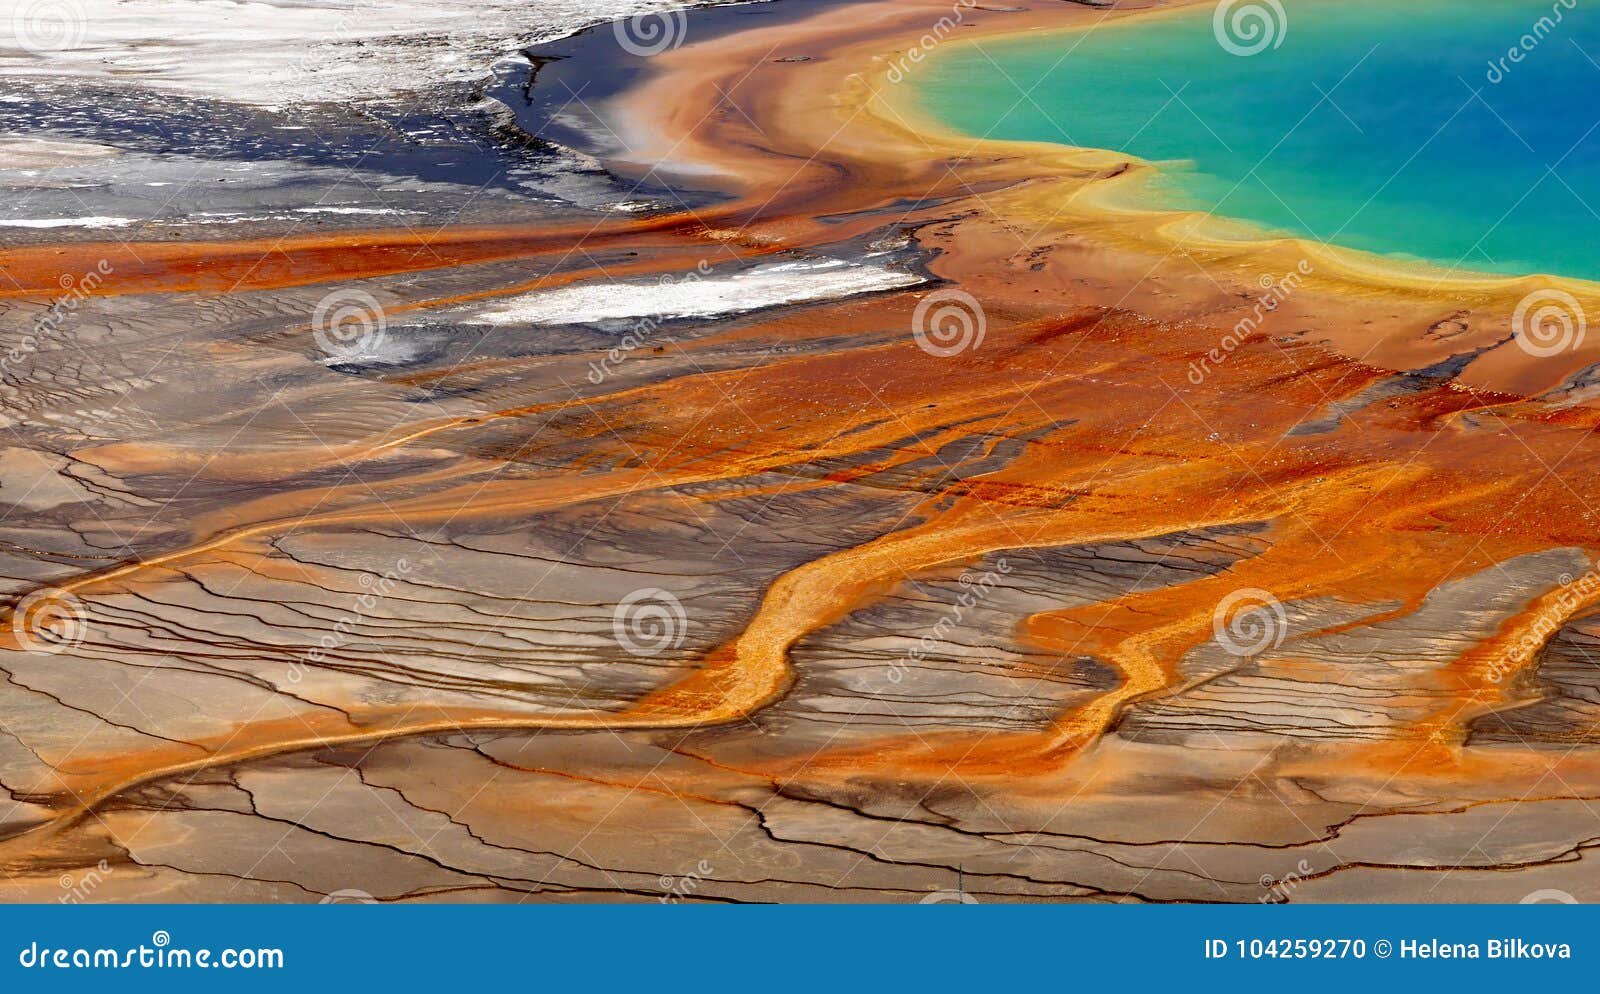 Magical Eye, Yellowstone, Natural Colors Background Stock Photo - Image of  spring, landmark: 104259270